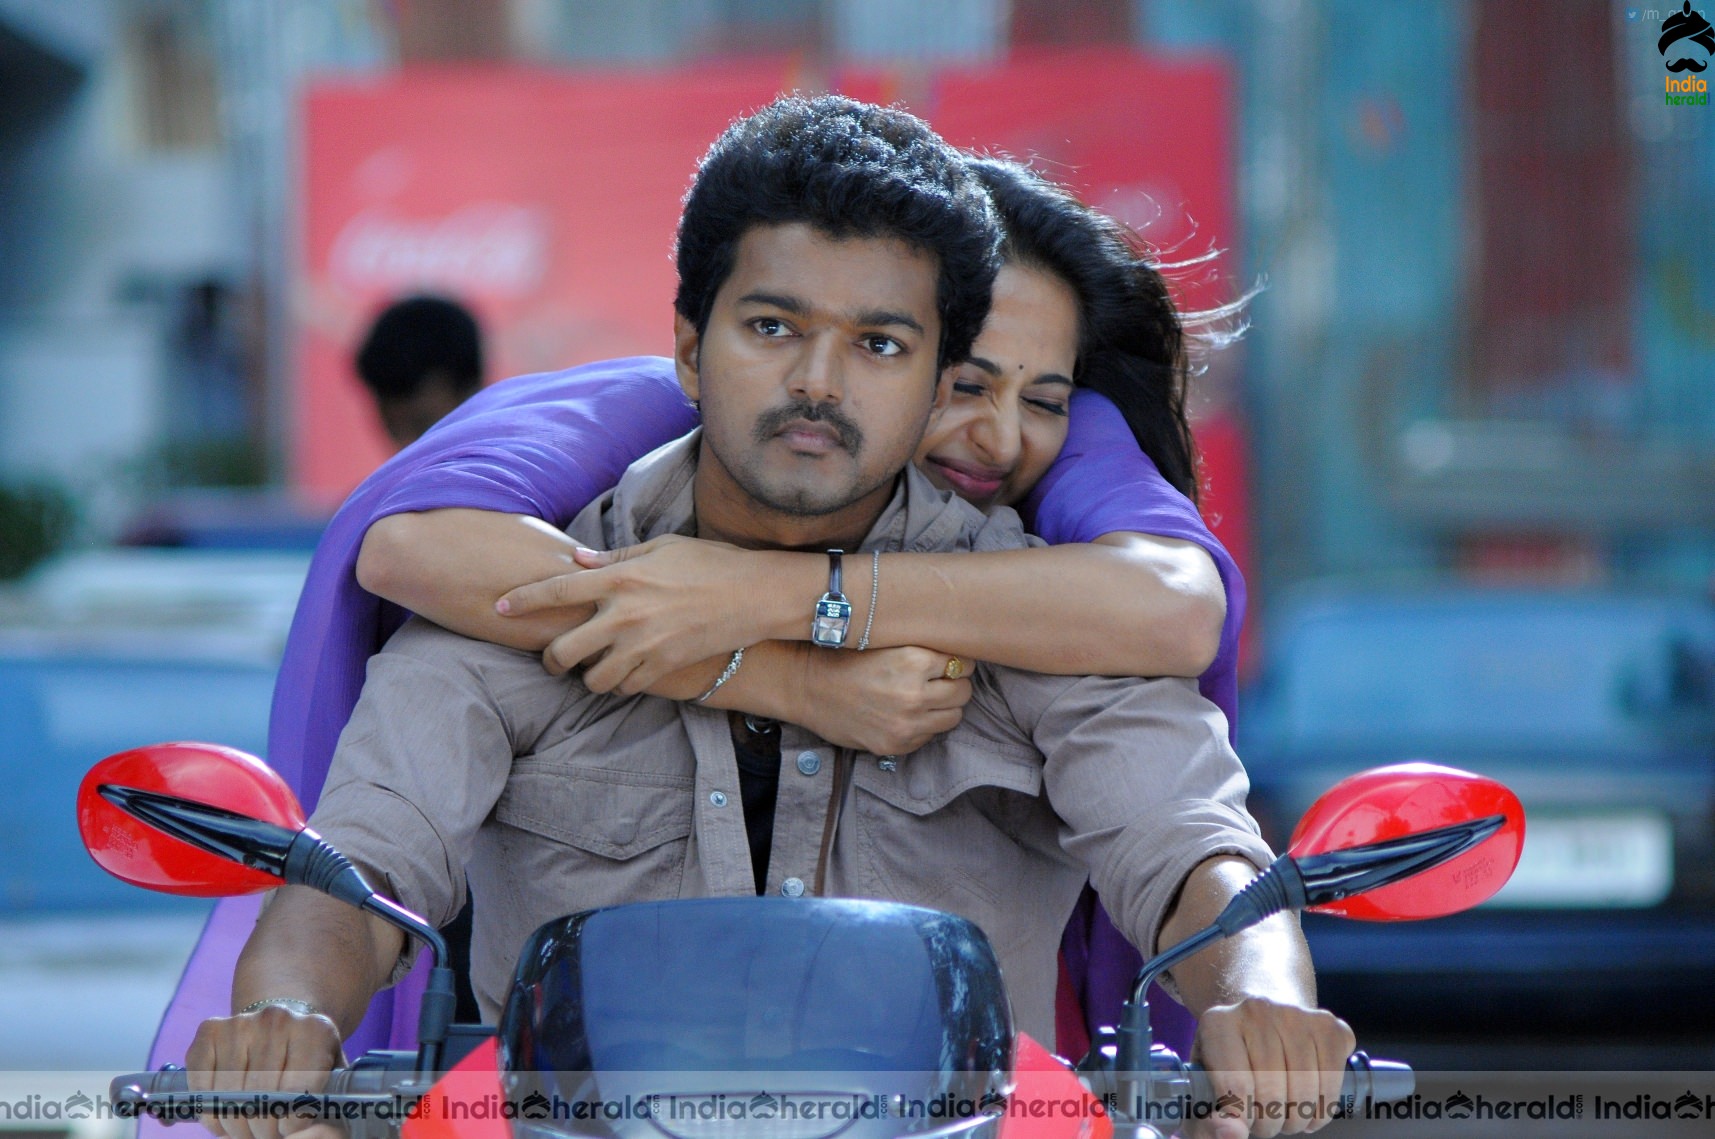 INDIA HERALD EXCLUSIVE Hot Anushka Shetty and Vijay in a Tamil movie during Early Stages Set 4